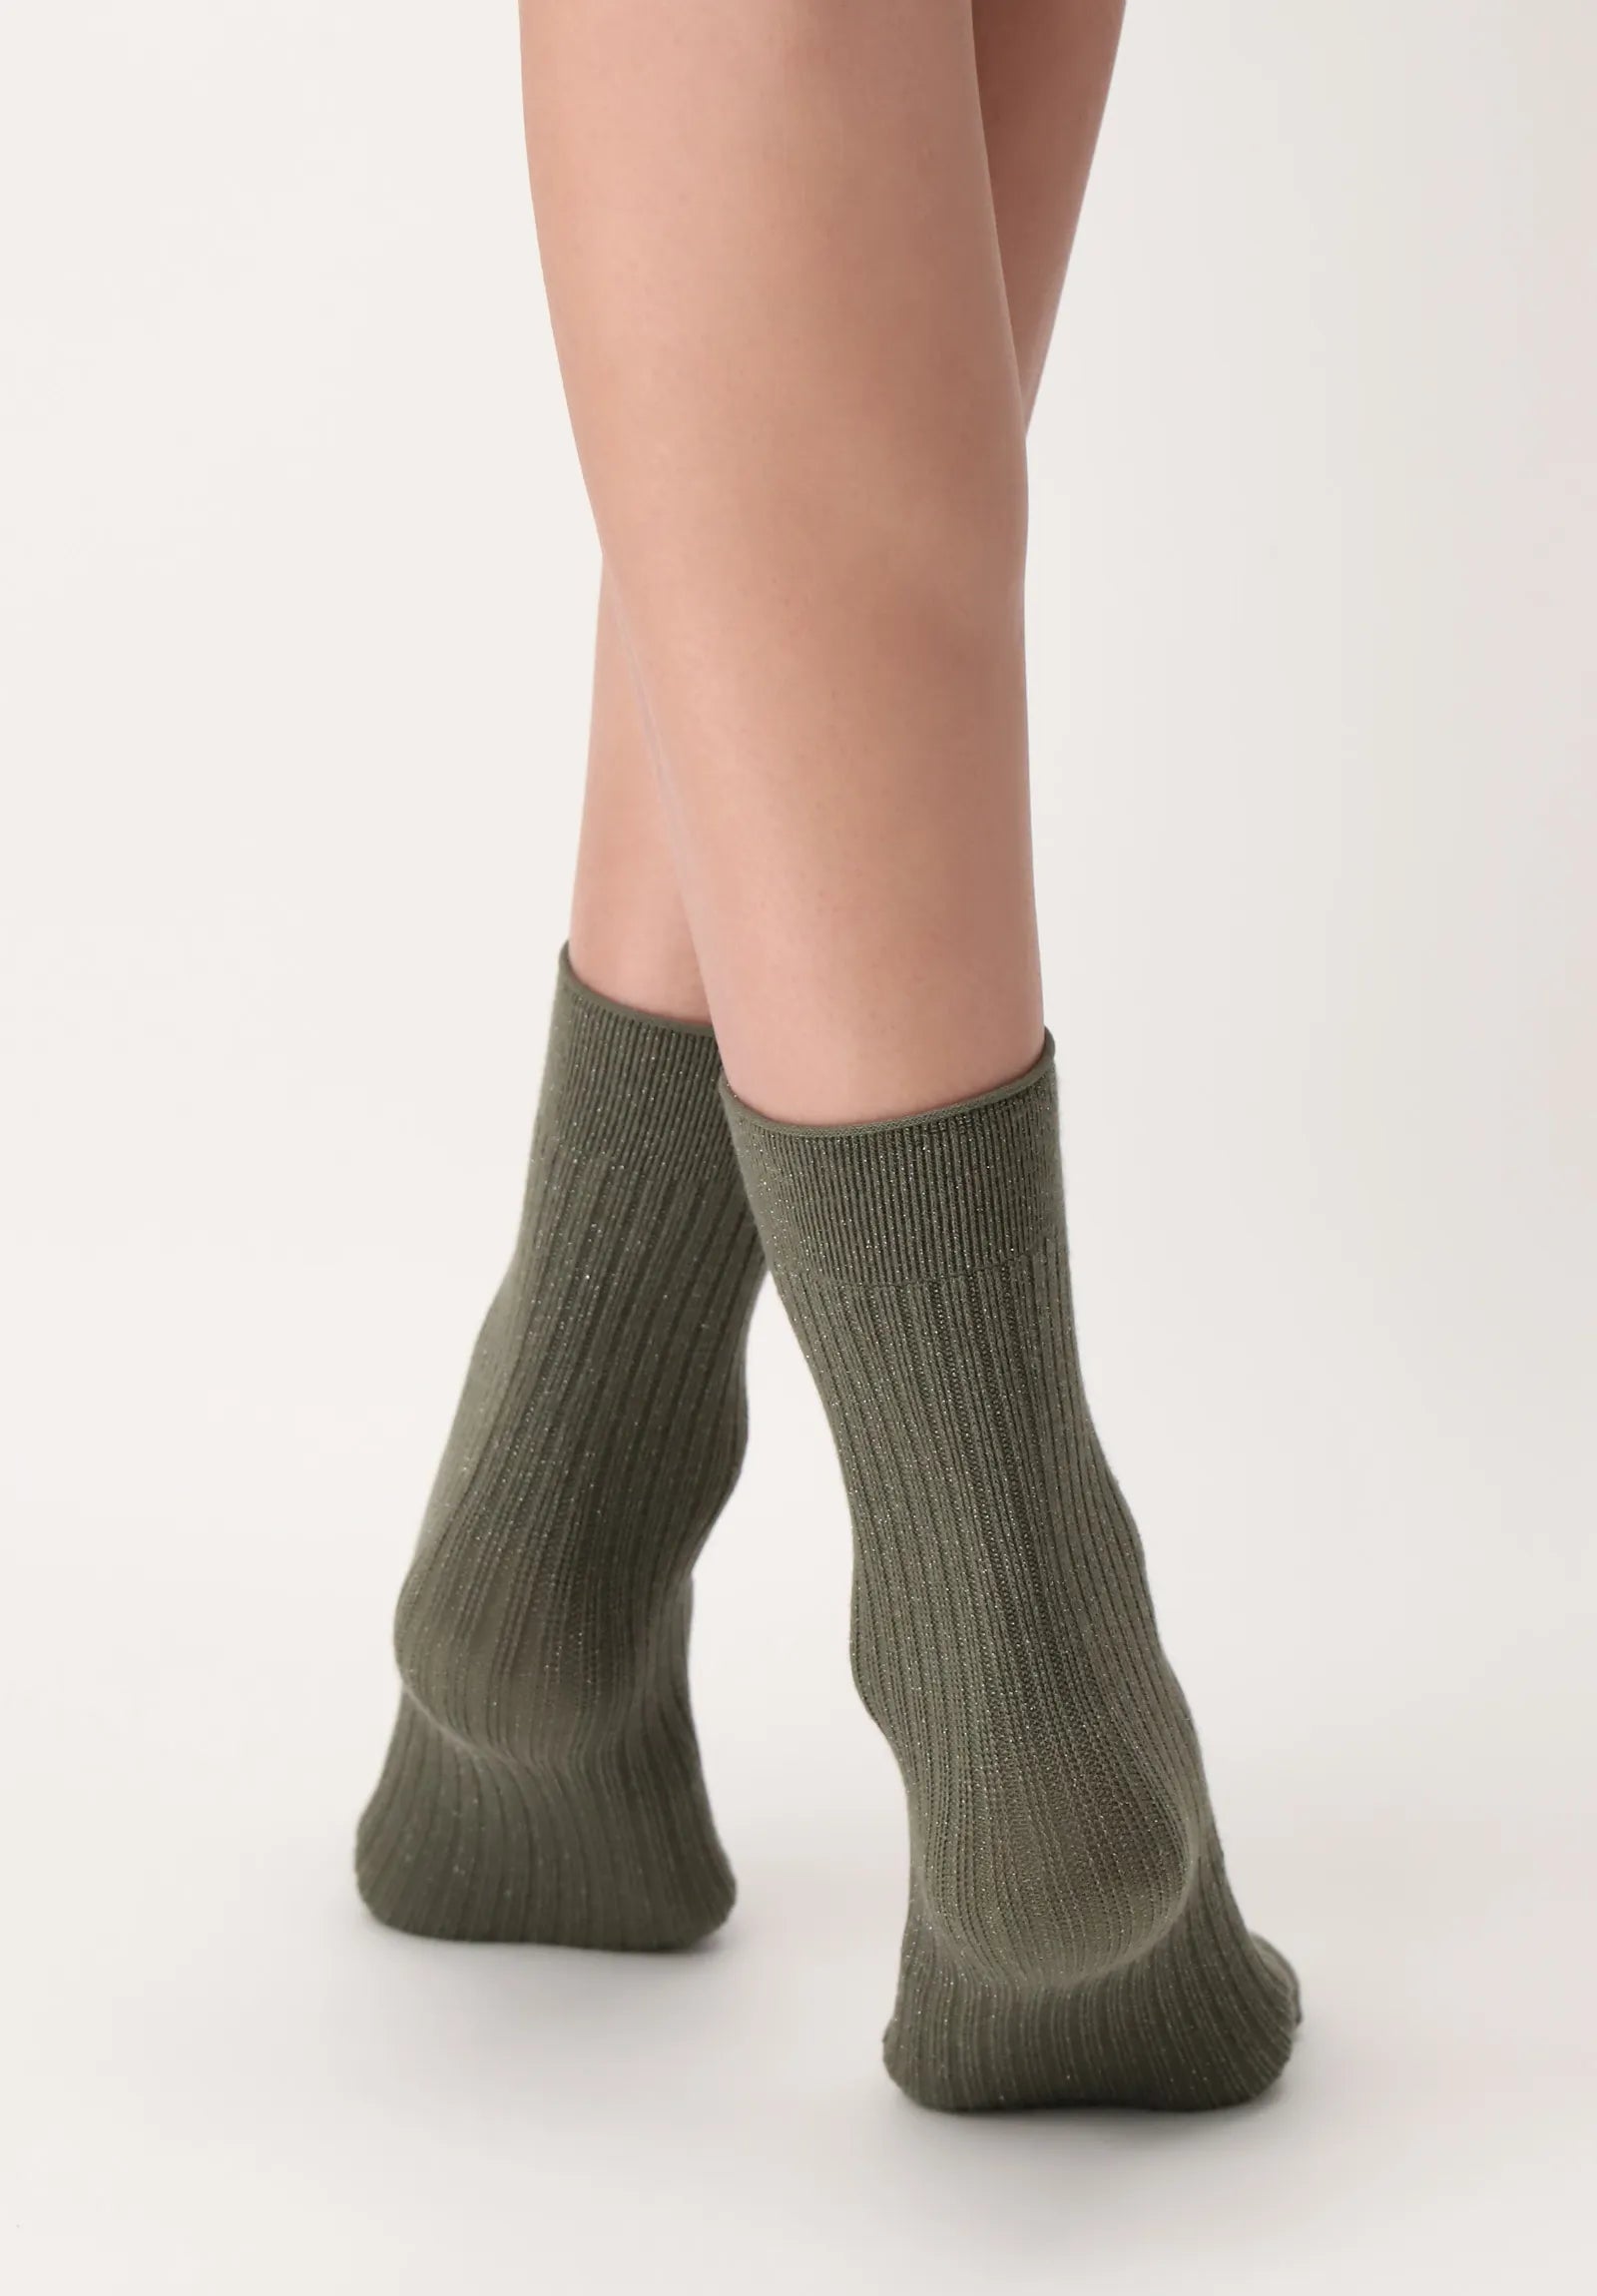 OroblÌ_ Bright Rib Sock - Soft and warm khaki green ribbed knitted ankle socks with sparkly silver lurex throughout.